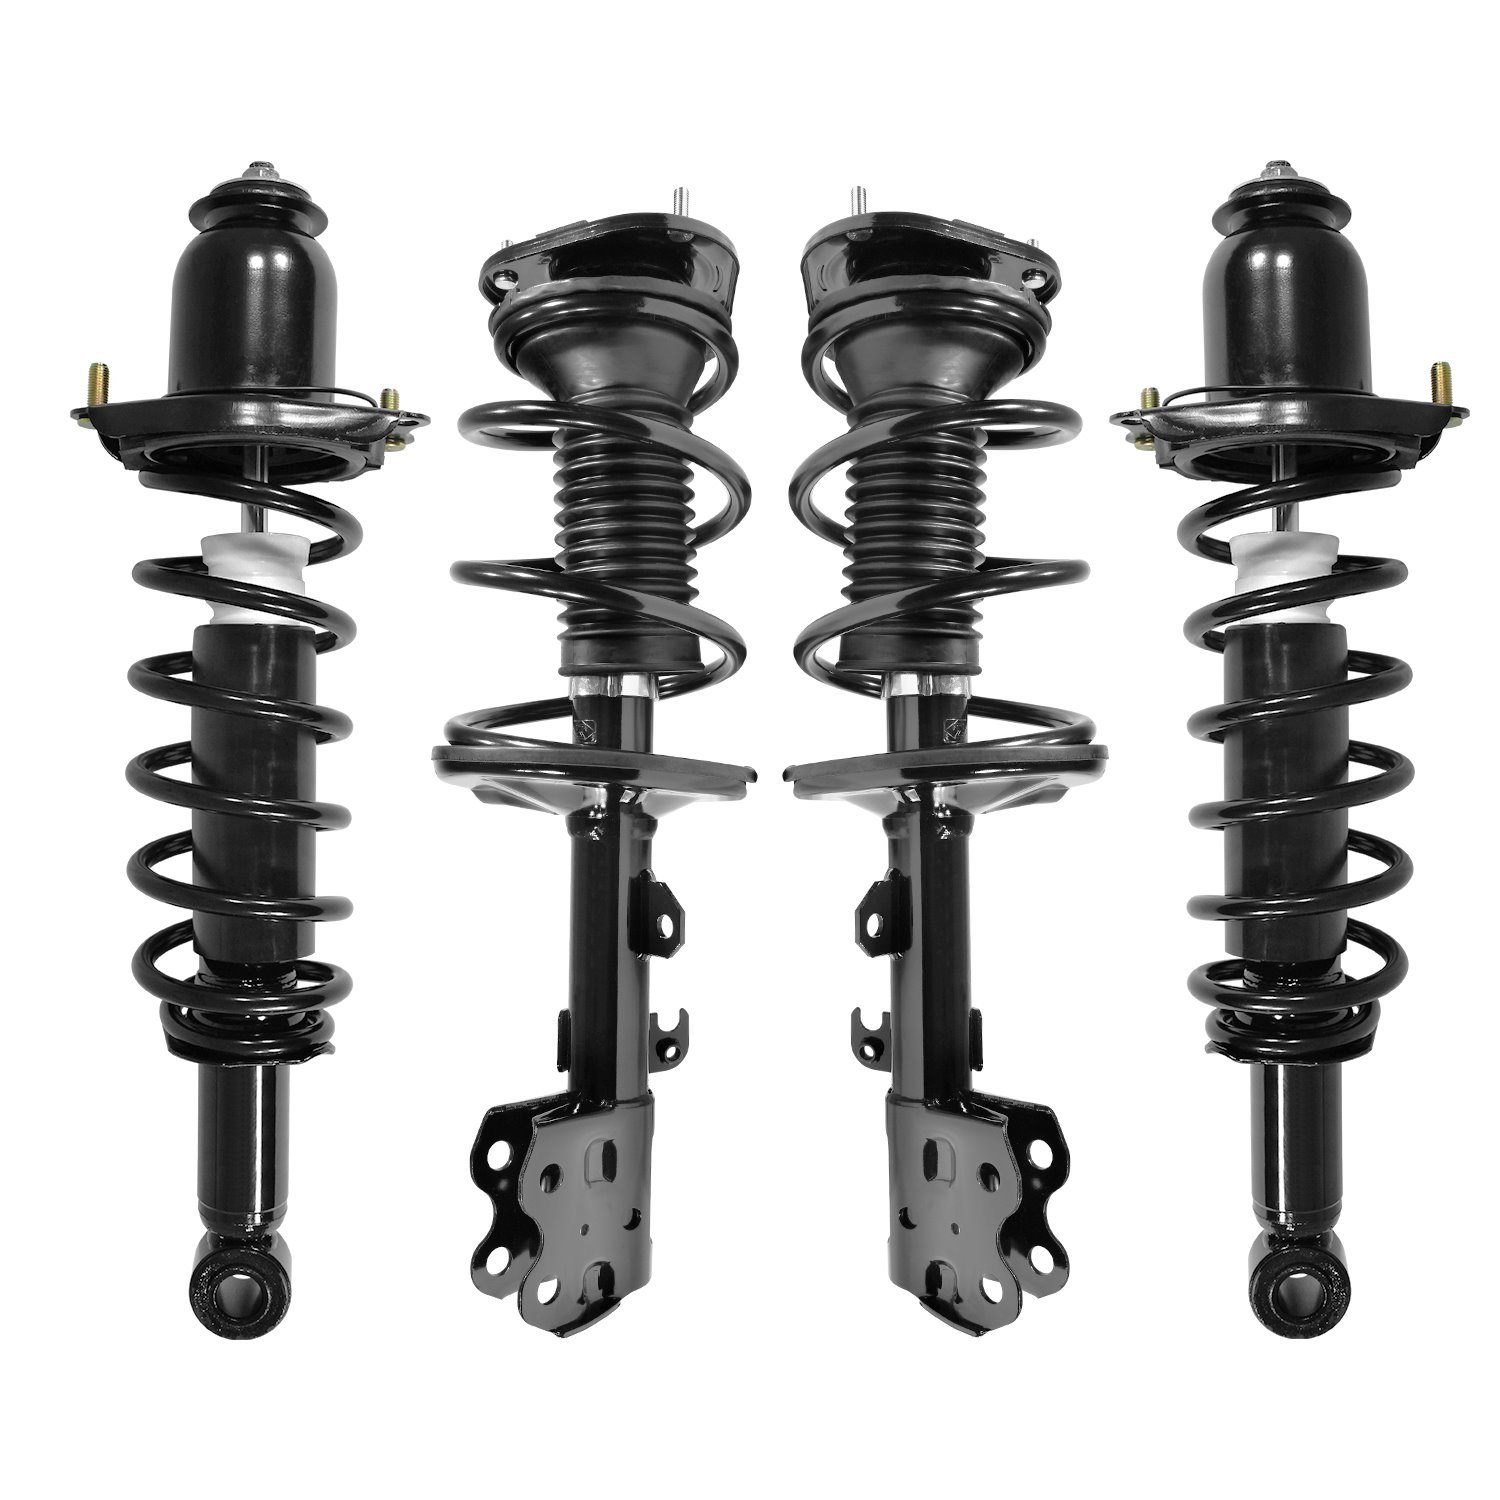 4-11101-15373-001 Front & Rear Suspension Strut & Coil Spring Assembly Kit Fits Select Toyota Prius